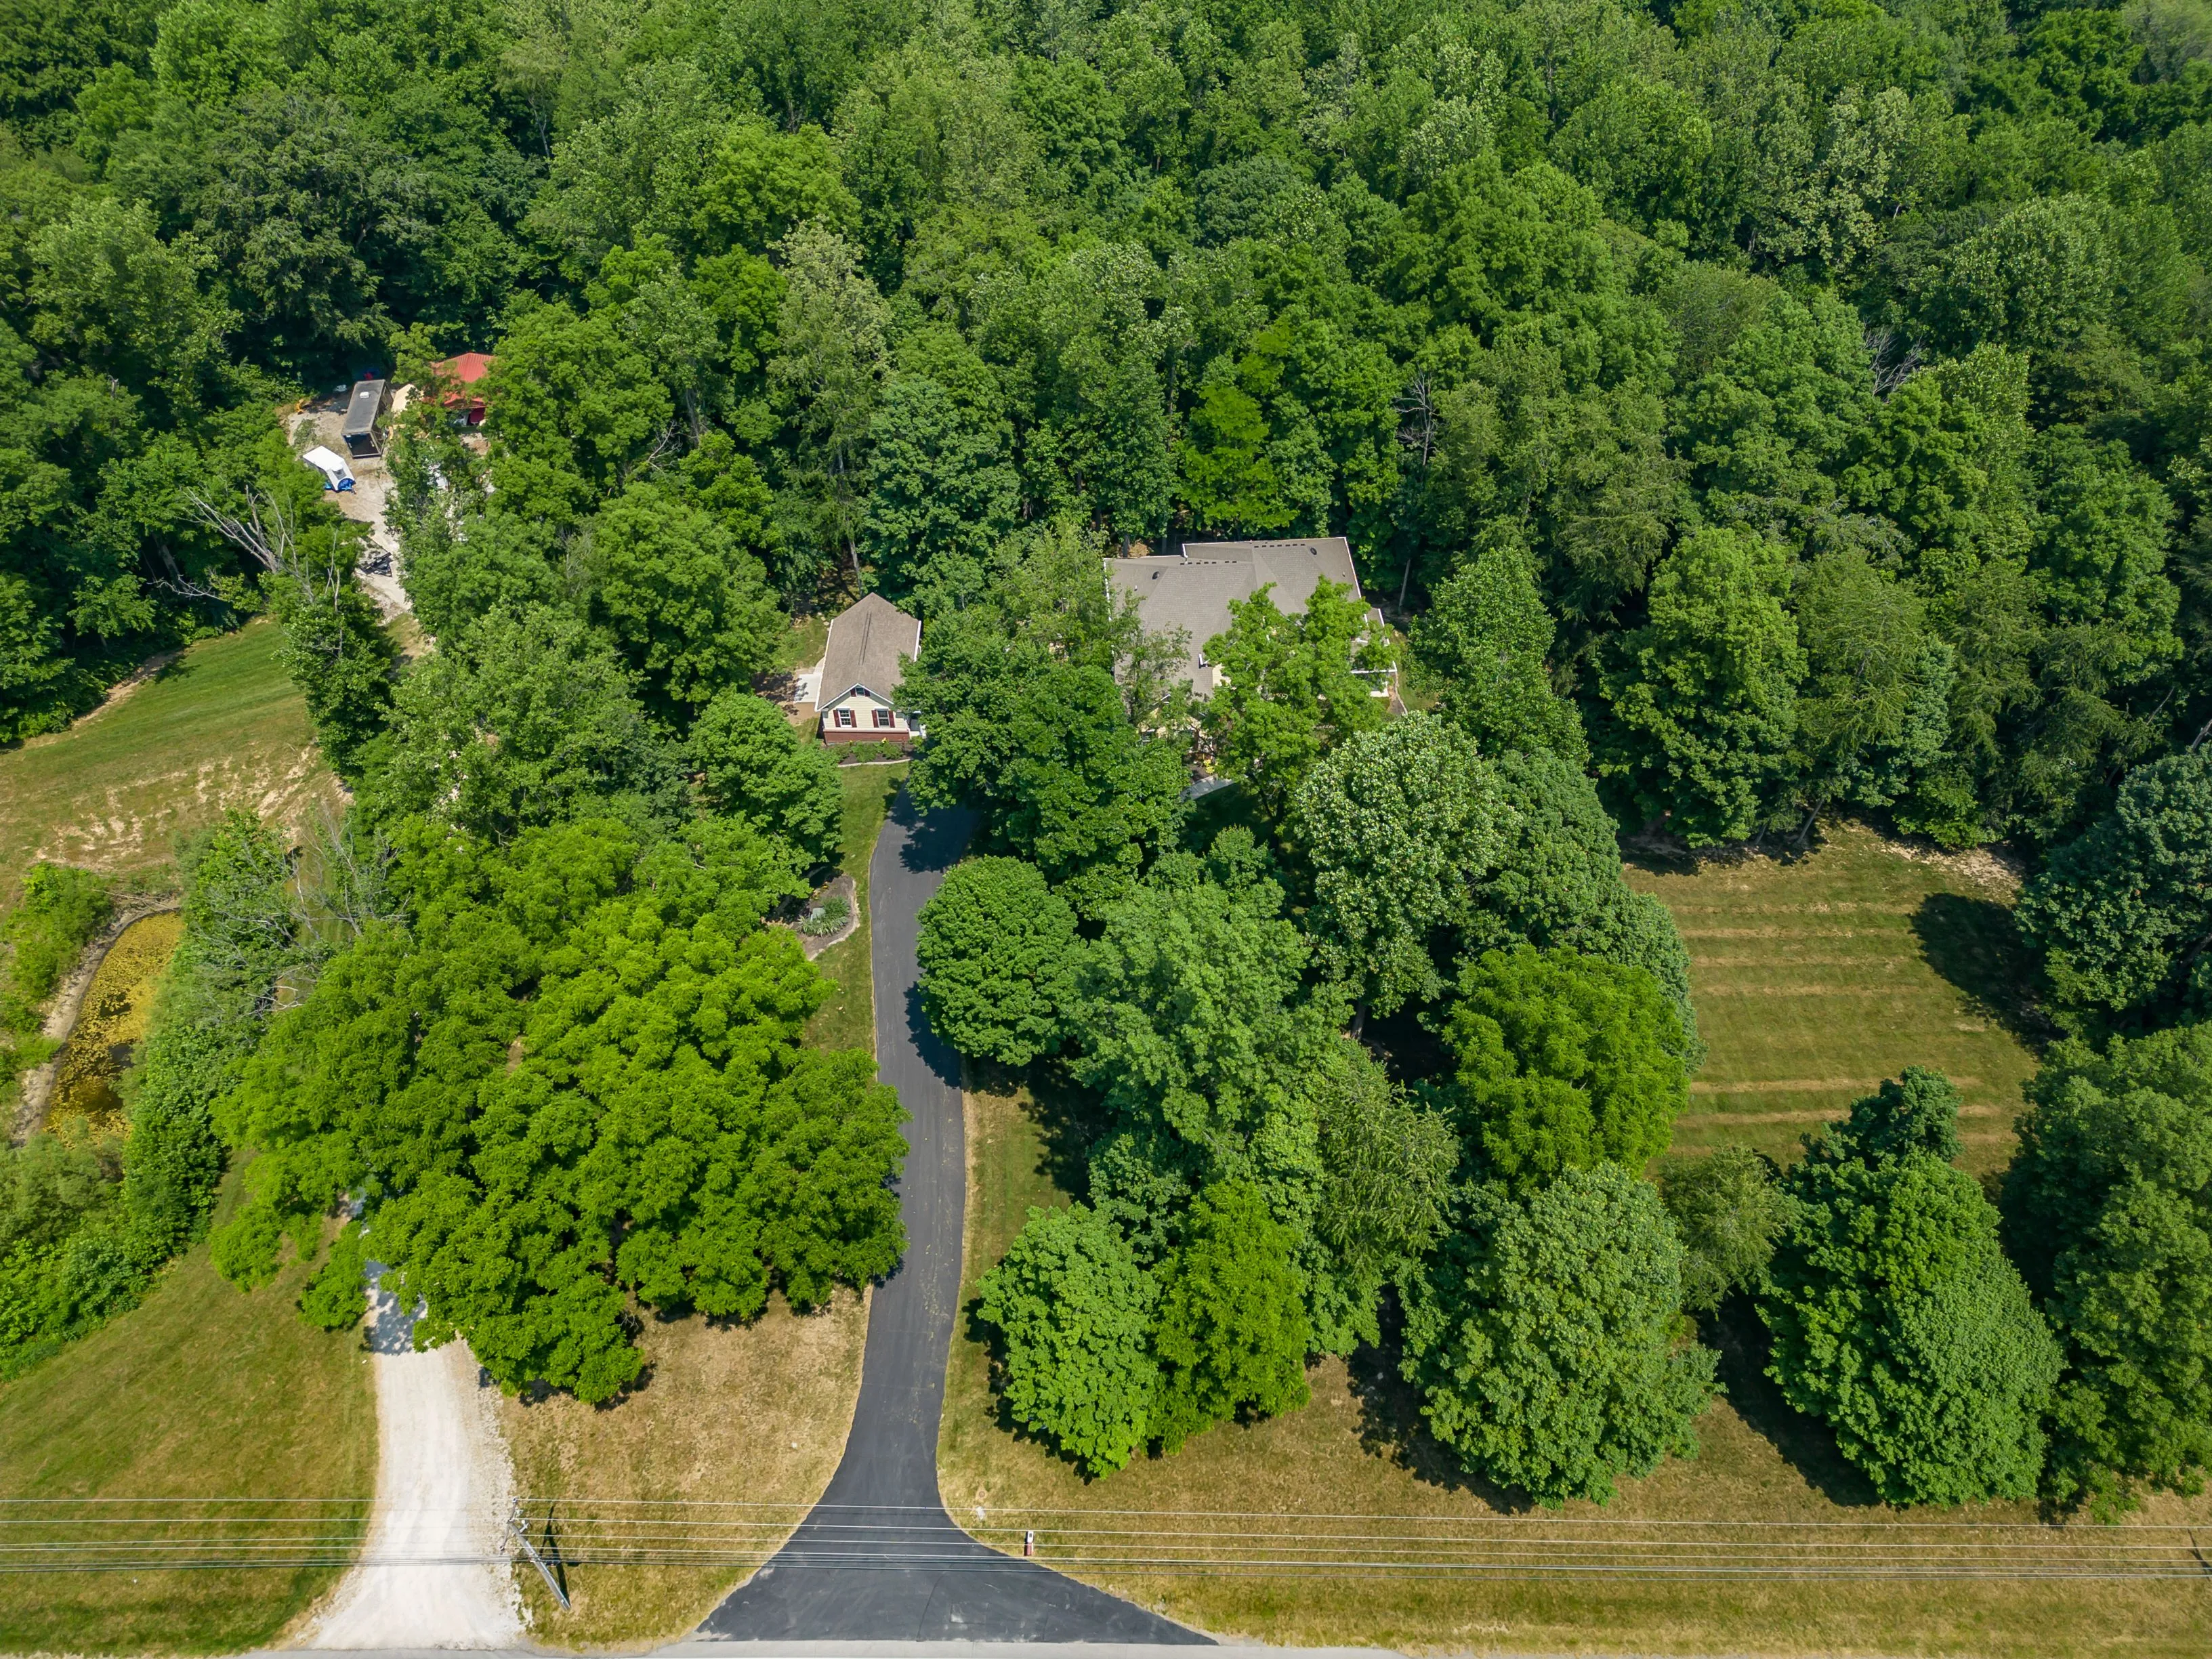 Aerial view of a winding road leading to a house surrounded by dense green trees.